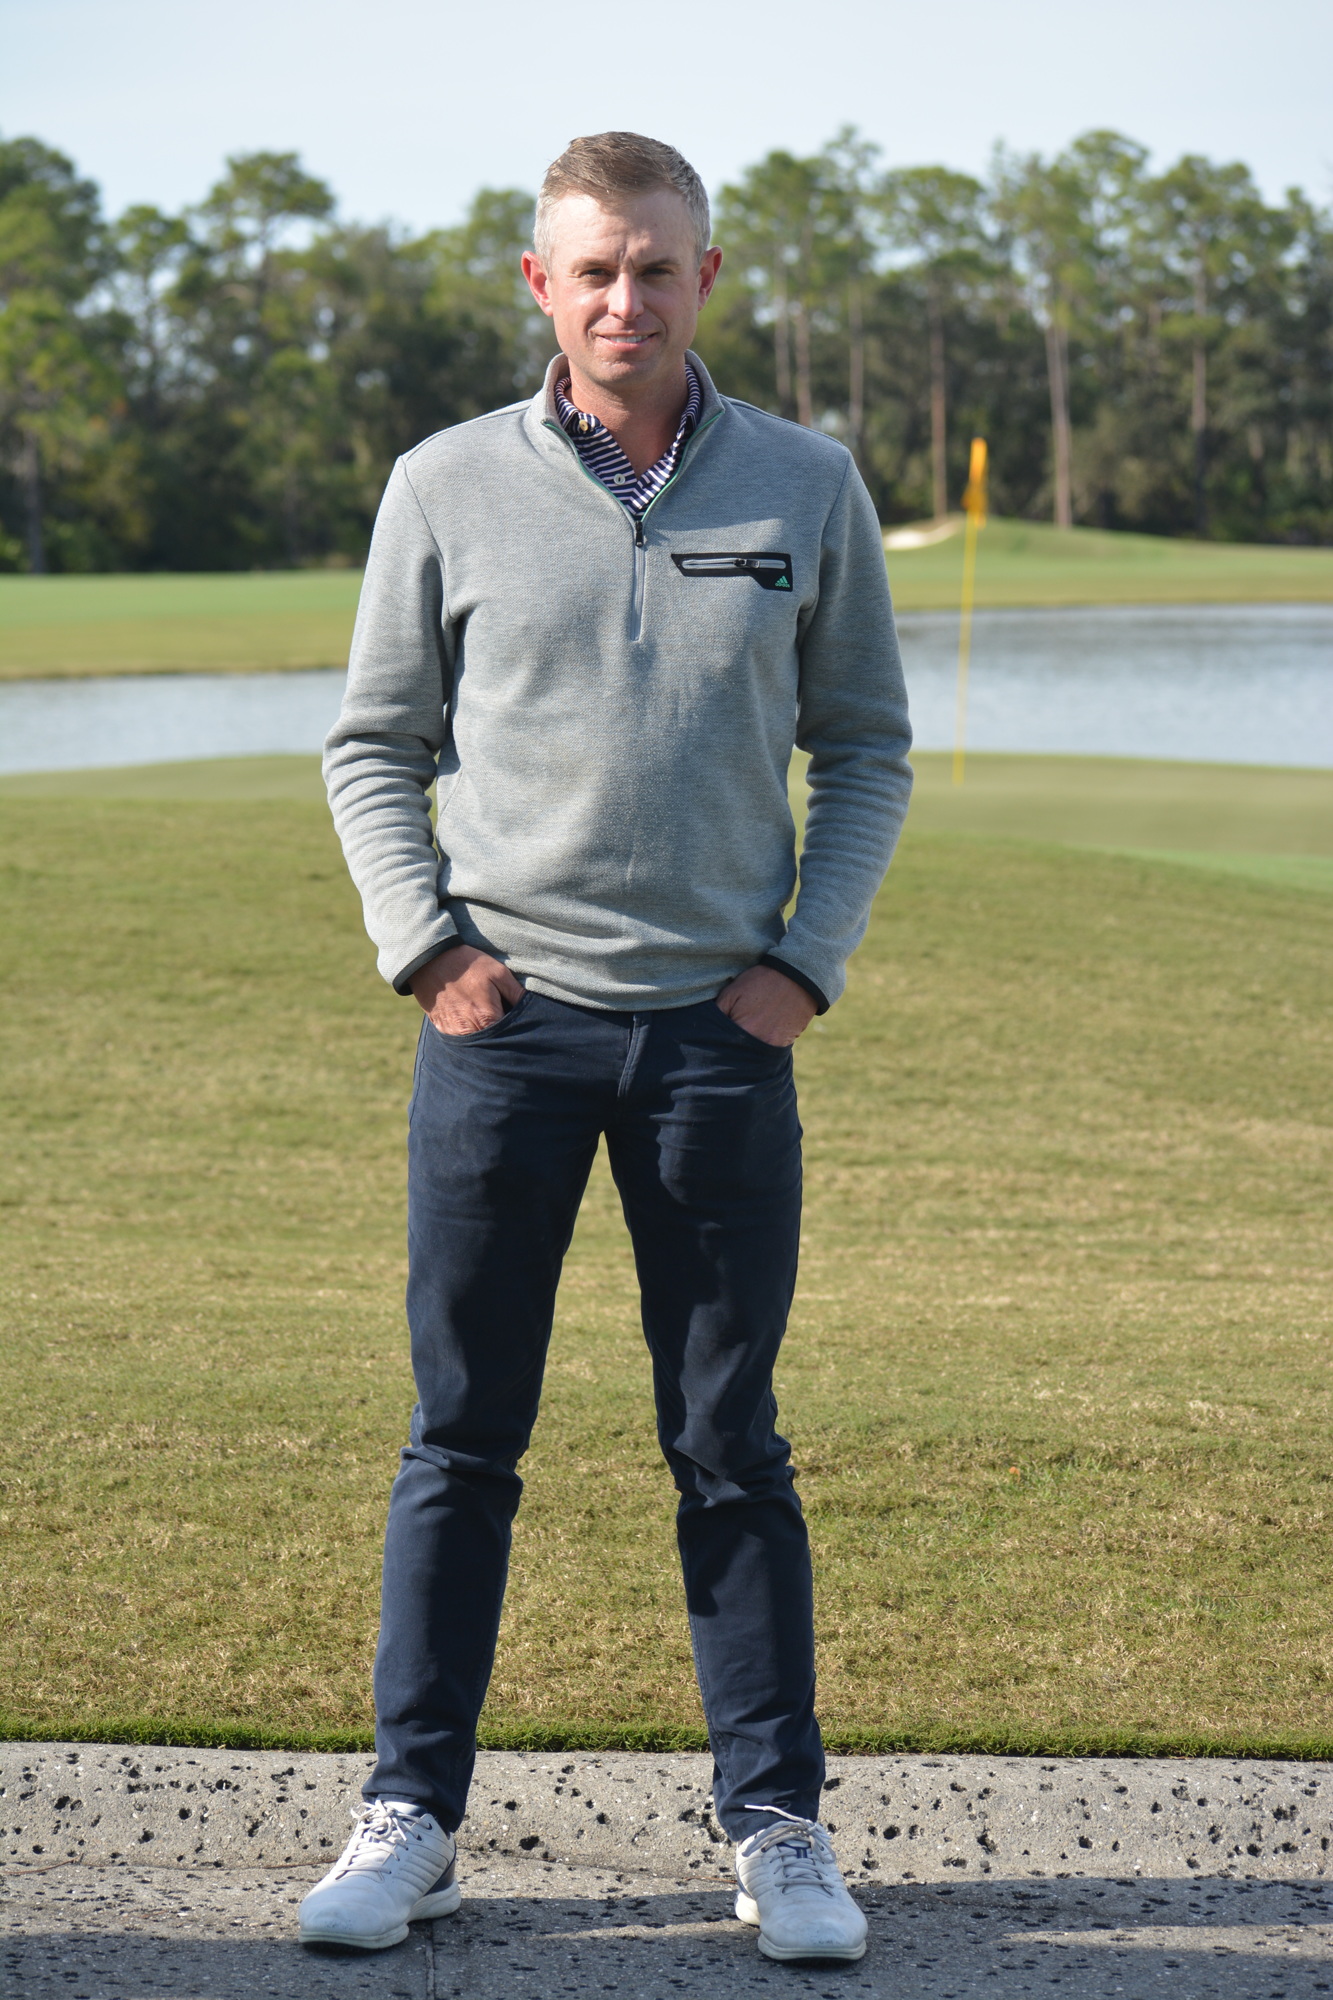 Concession Golf Club's Director of Instruction, Matt McLean, was named one of Golf Digest's 